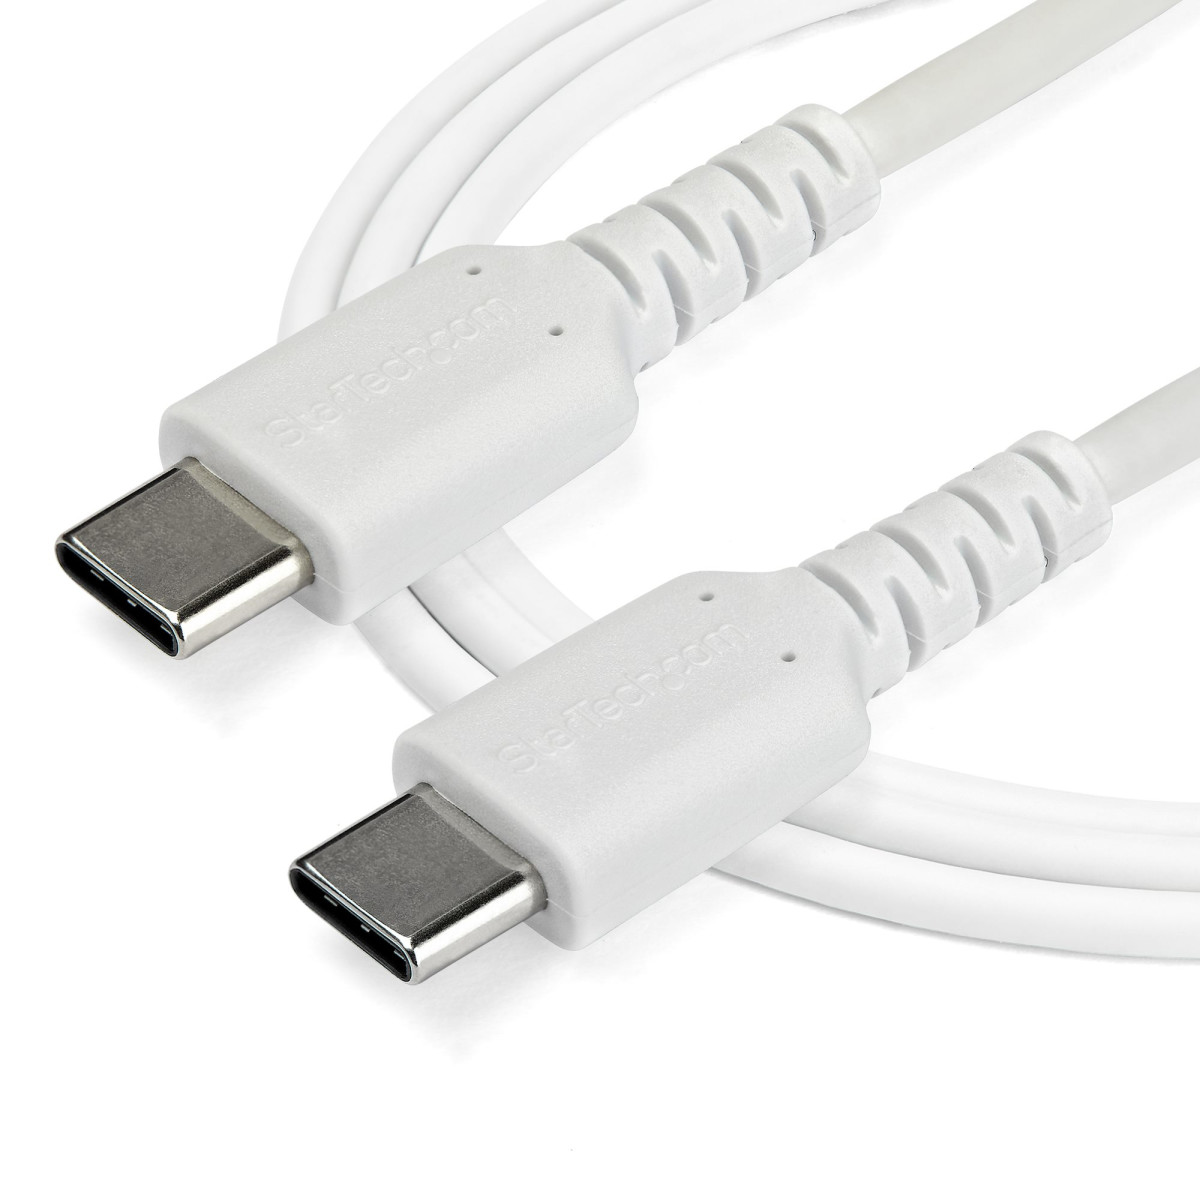 Cable - White USB C Cable 1m